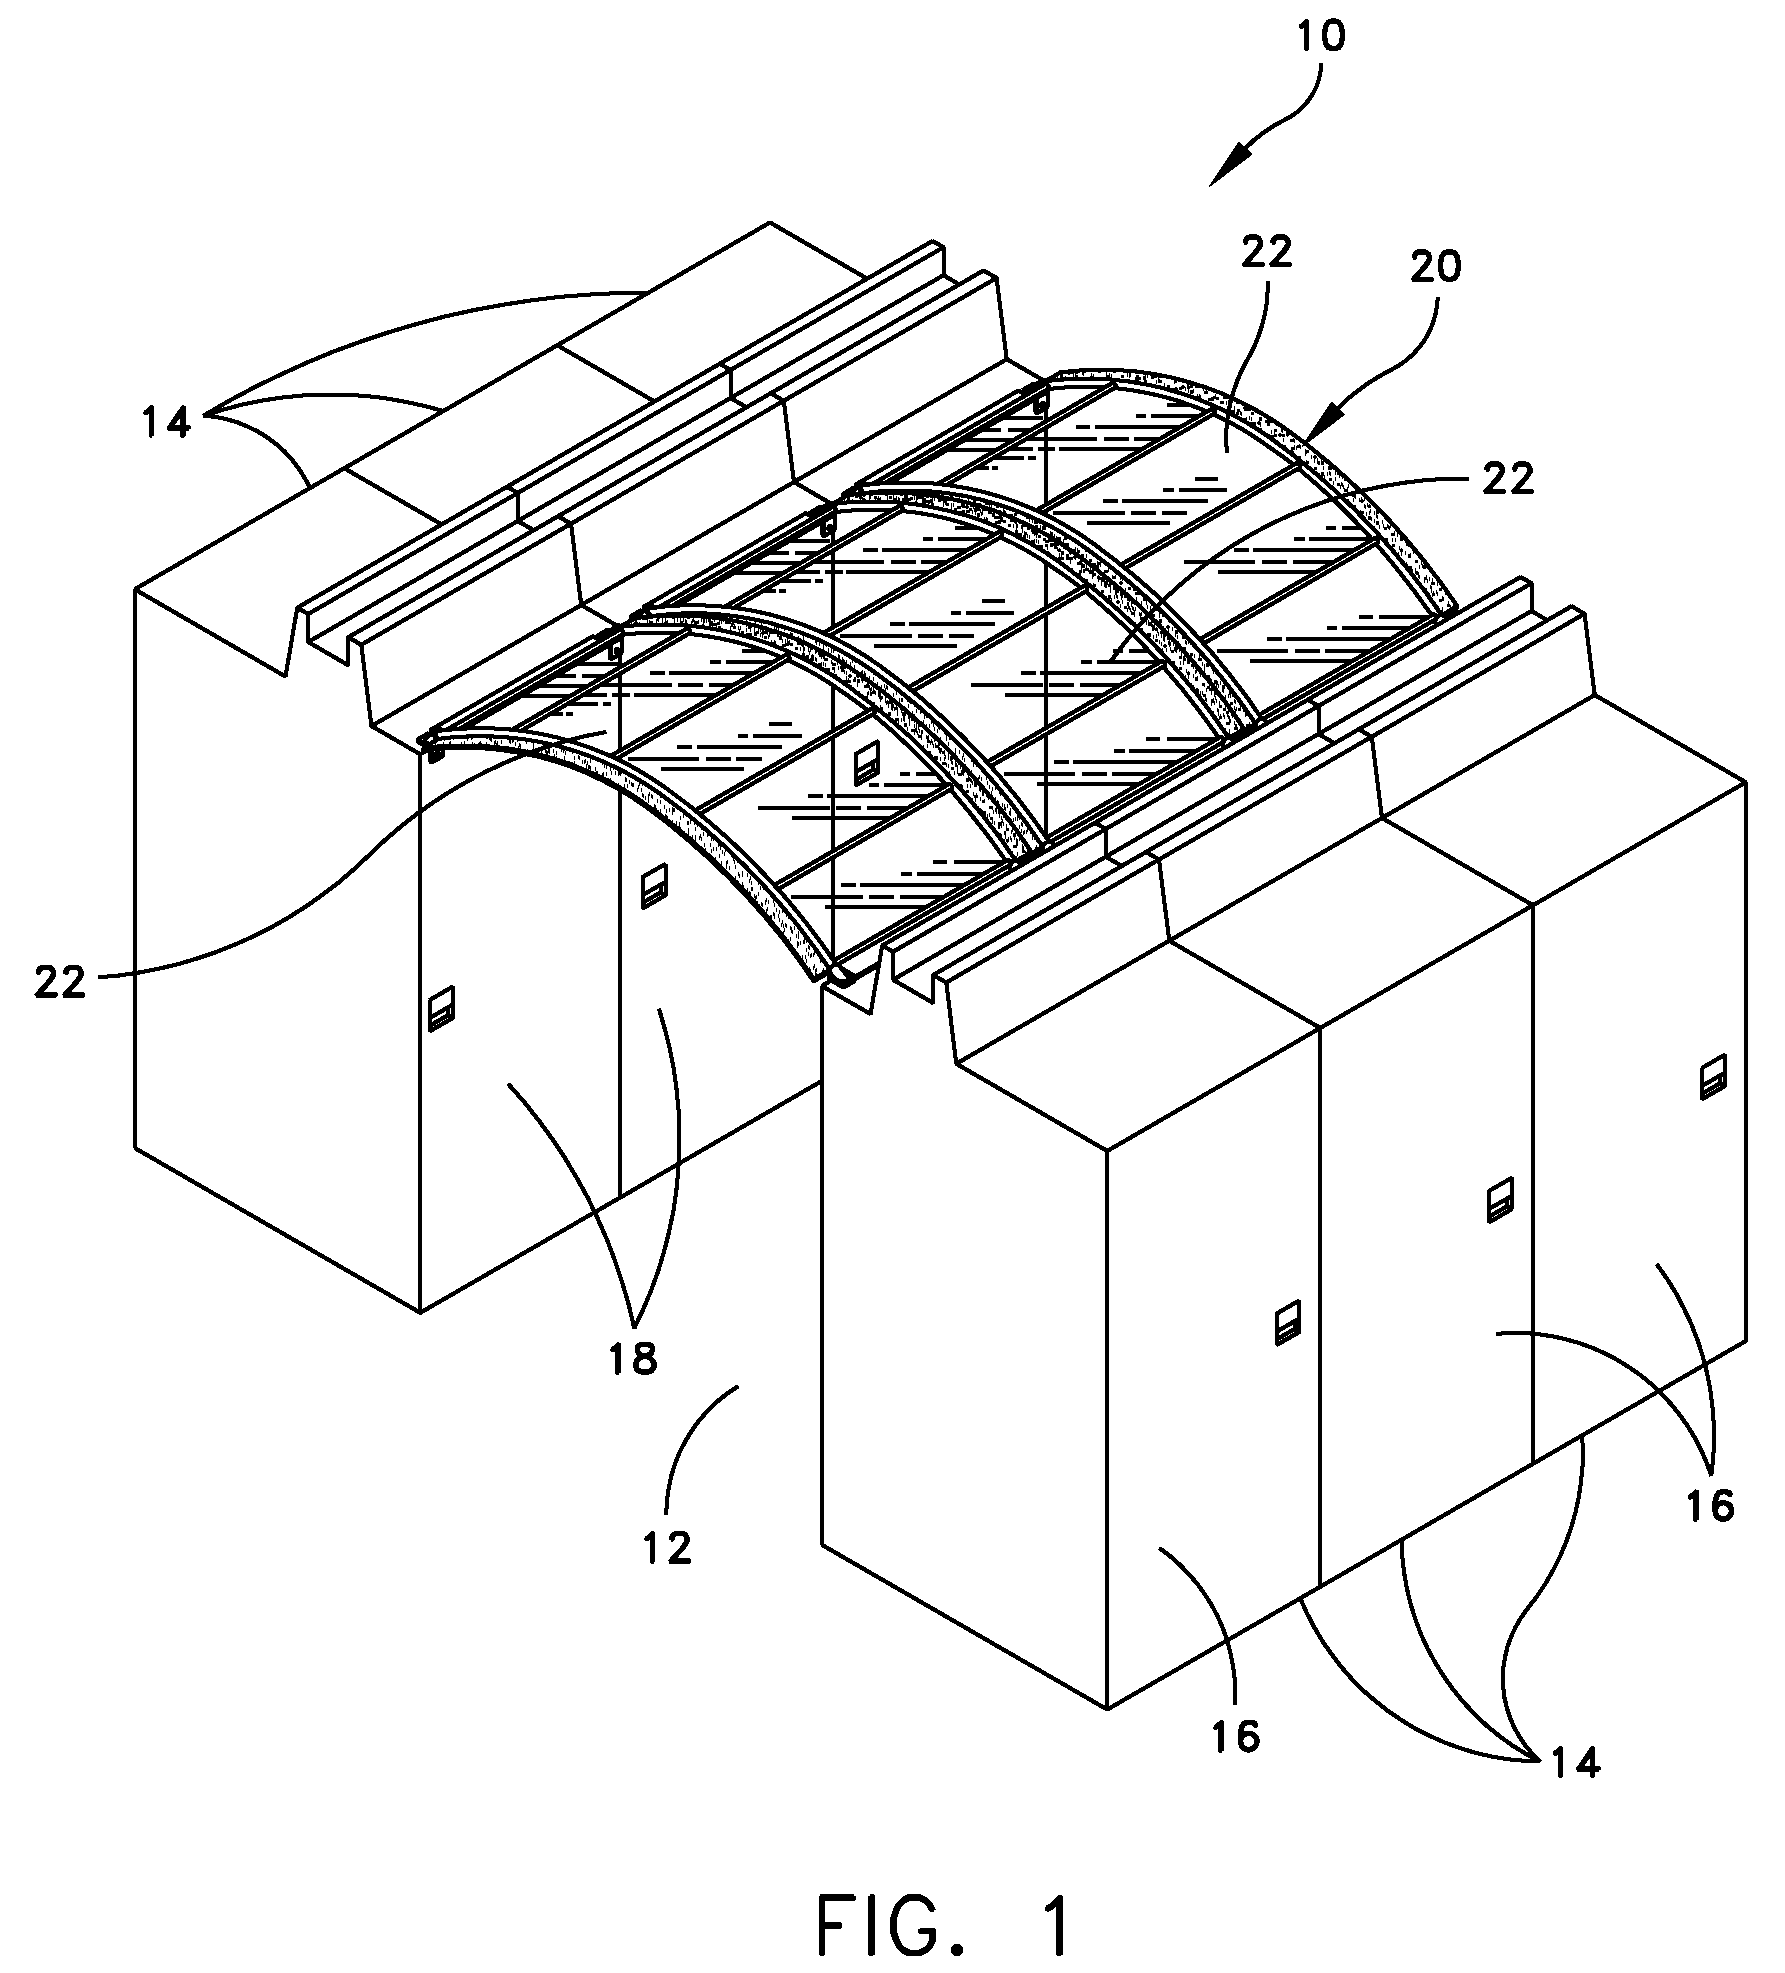 Hot aisle containment panel system and method